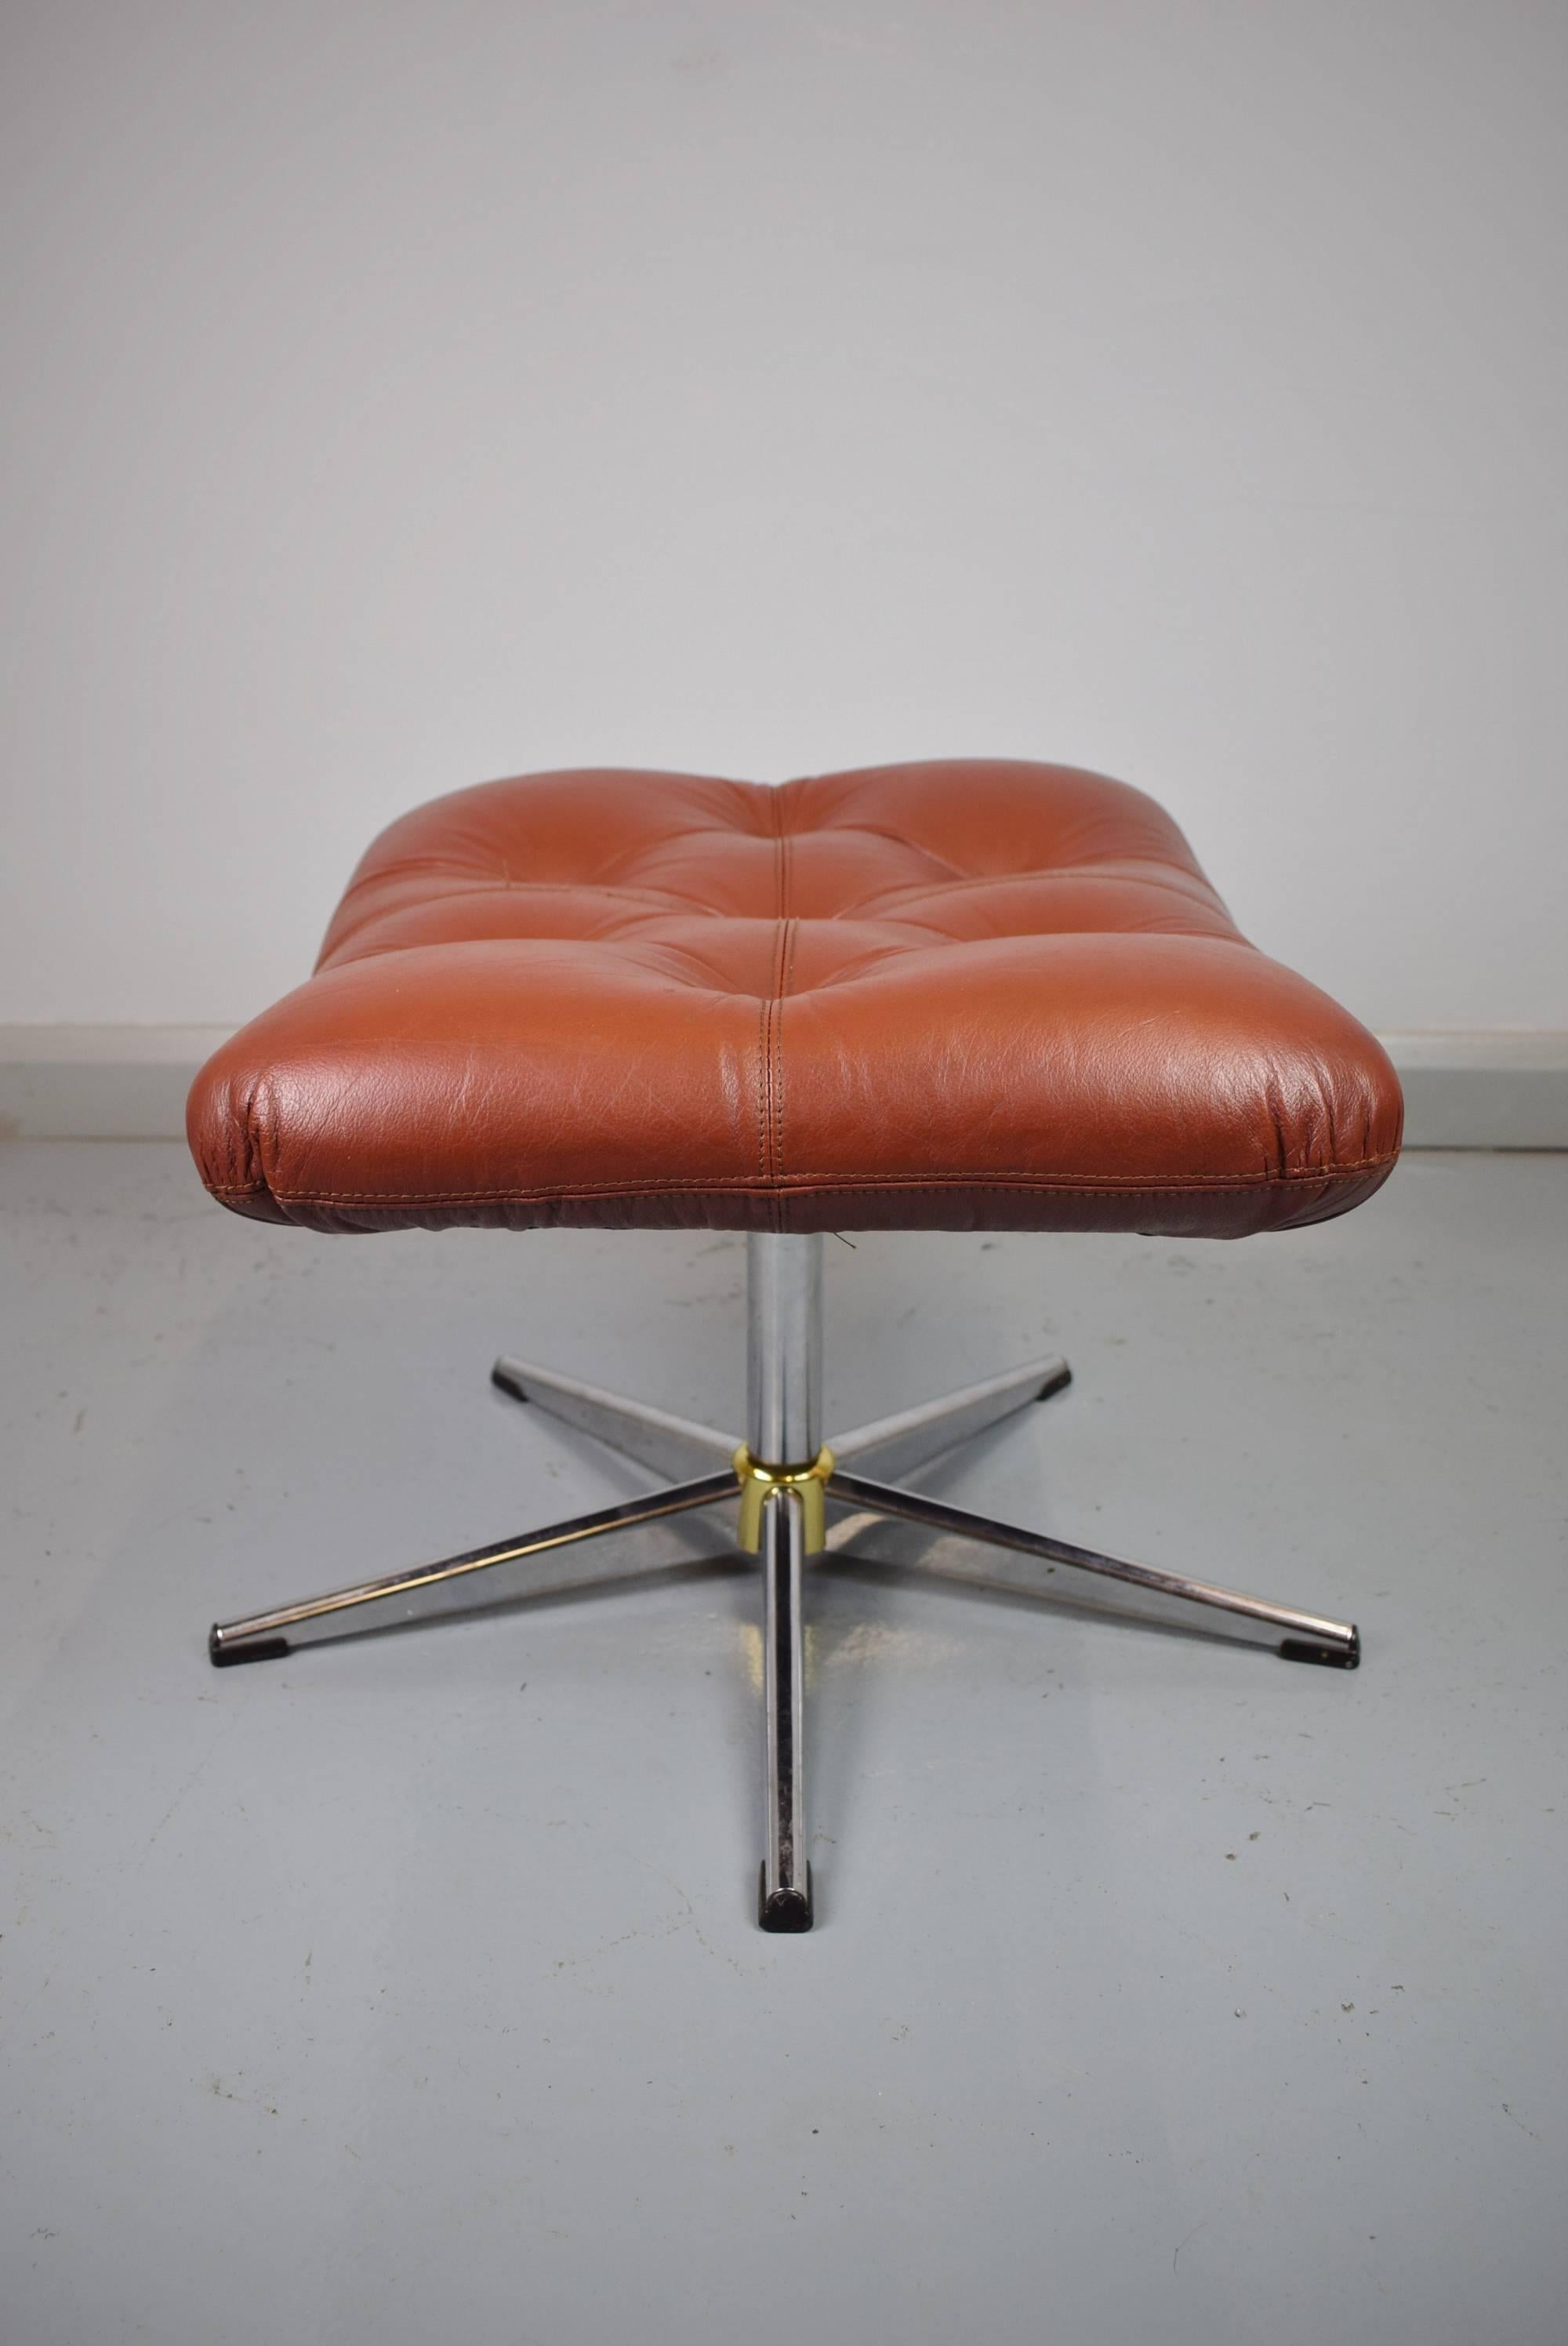 Designer: Danish Design

Manufacturer: Unknown

Country: Denmark

Date: 1970s

Material: Metal frame with leather upholstery

Maximum Dimensions: Width 57cm, depth 44cm and height 35cm

Condition: In very good condition with only small